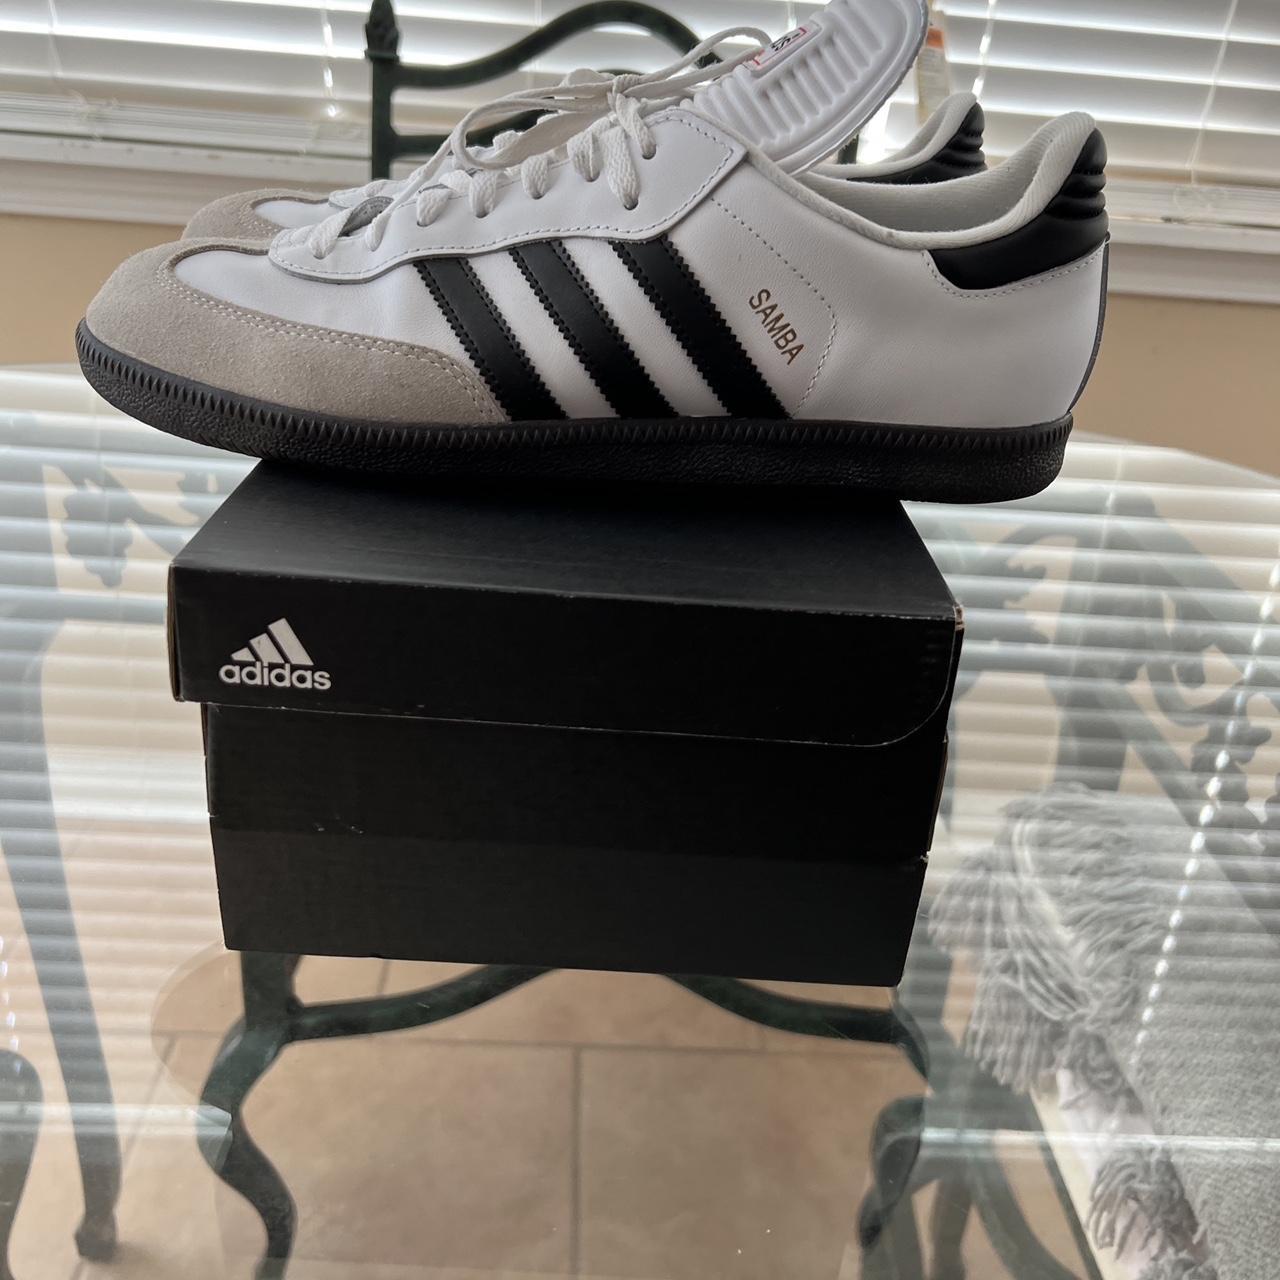 Adidas Men's White and Black Trainers (3)